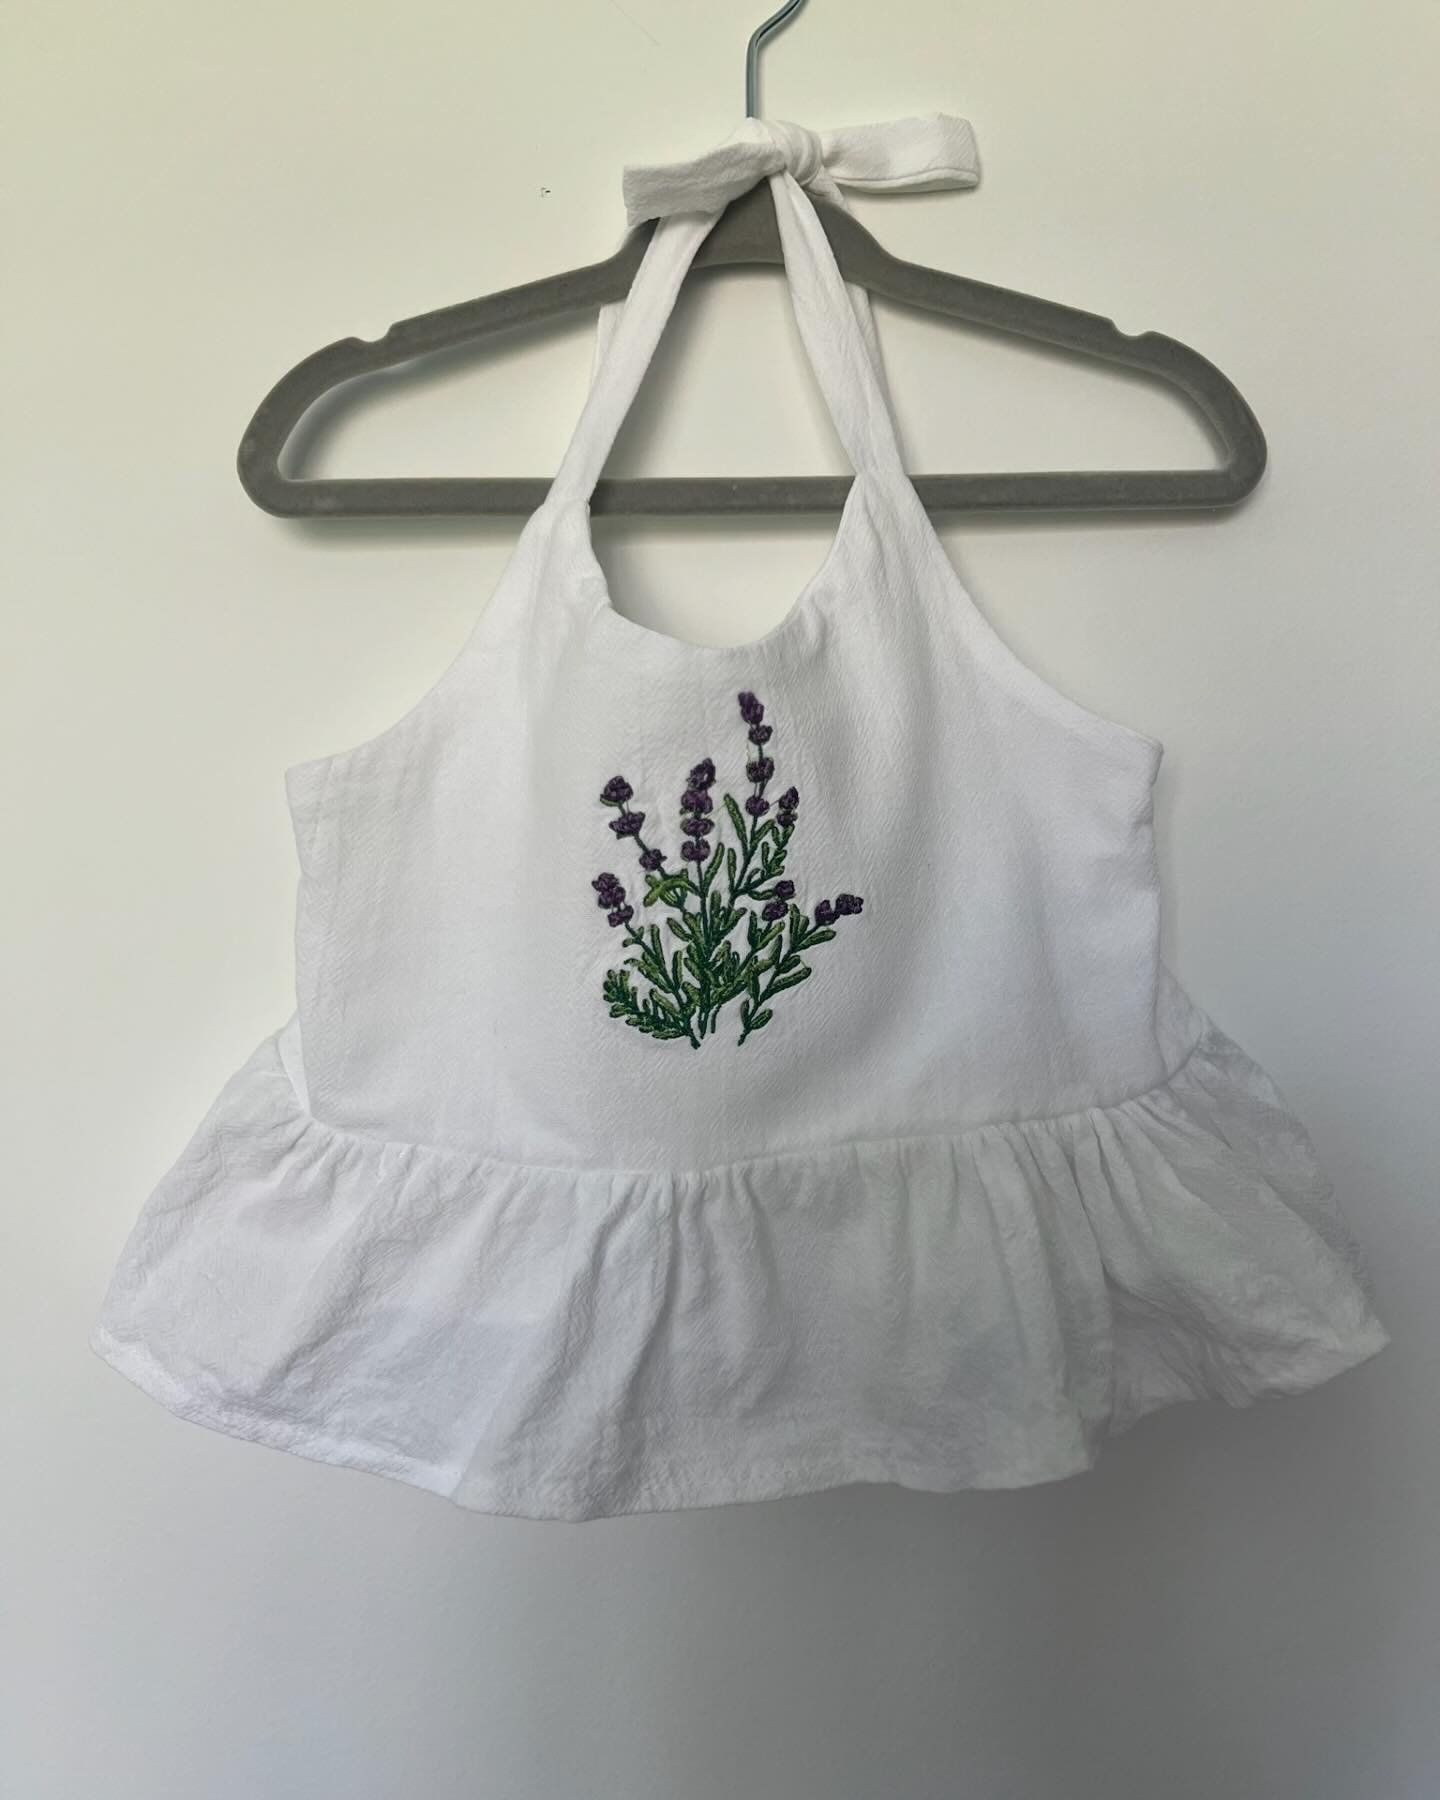 Spring is here and summer is just around the corner! ☀️100% cotton halter top with a linen/gauze feel - size 18-24m. Available on the Lei and Gray website in the &ldquo;gift shop&rdquo;